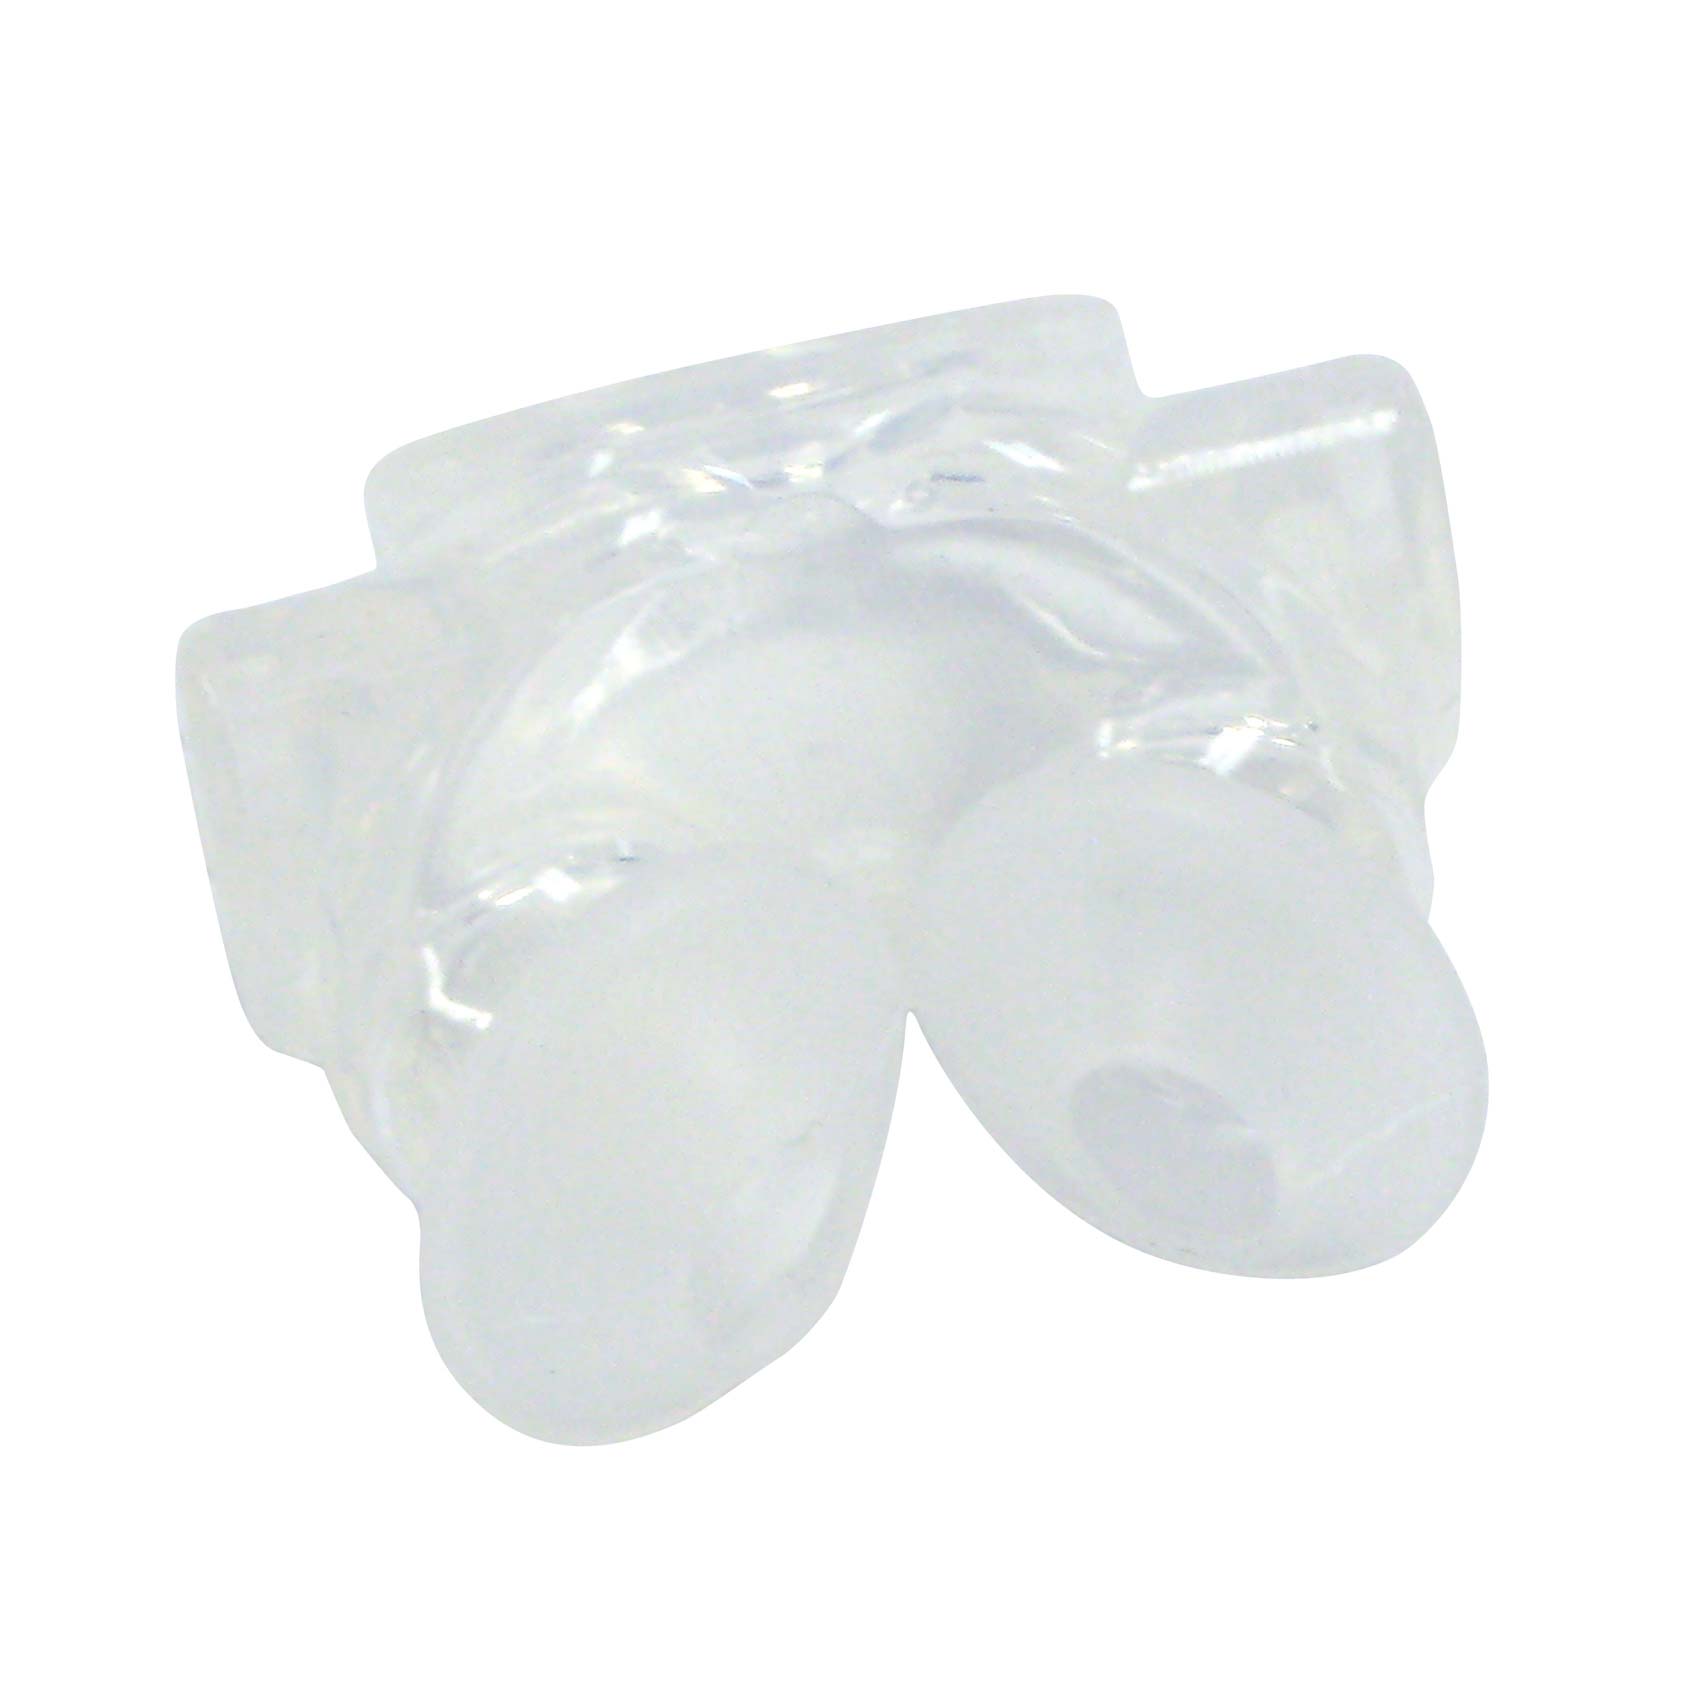 DeVilbiss Aloha Replacement CPAP Nasal Pillows-Small